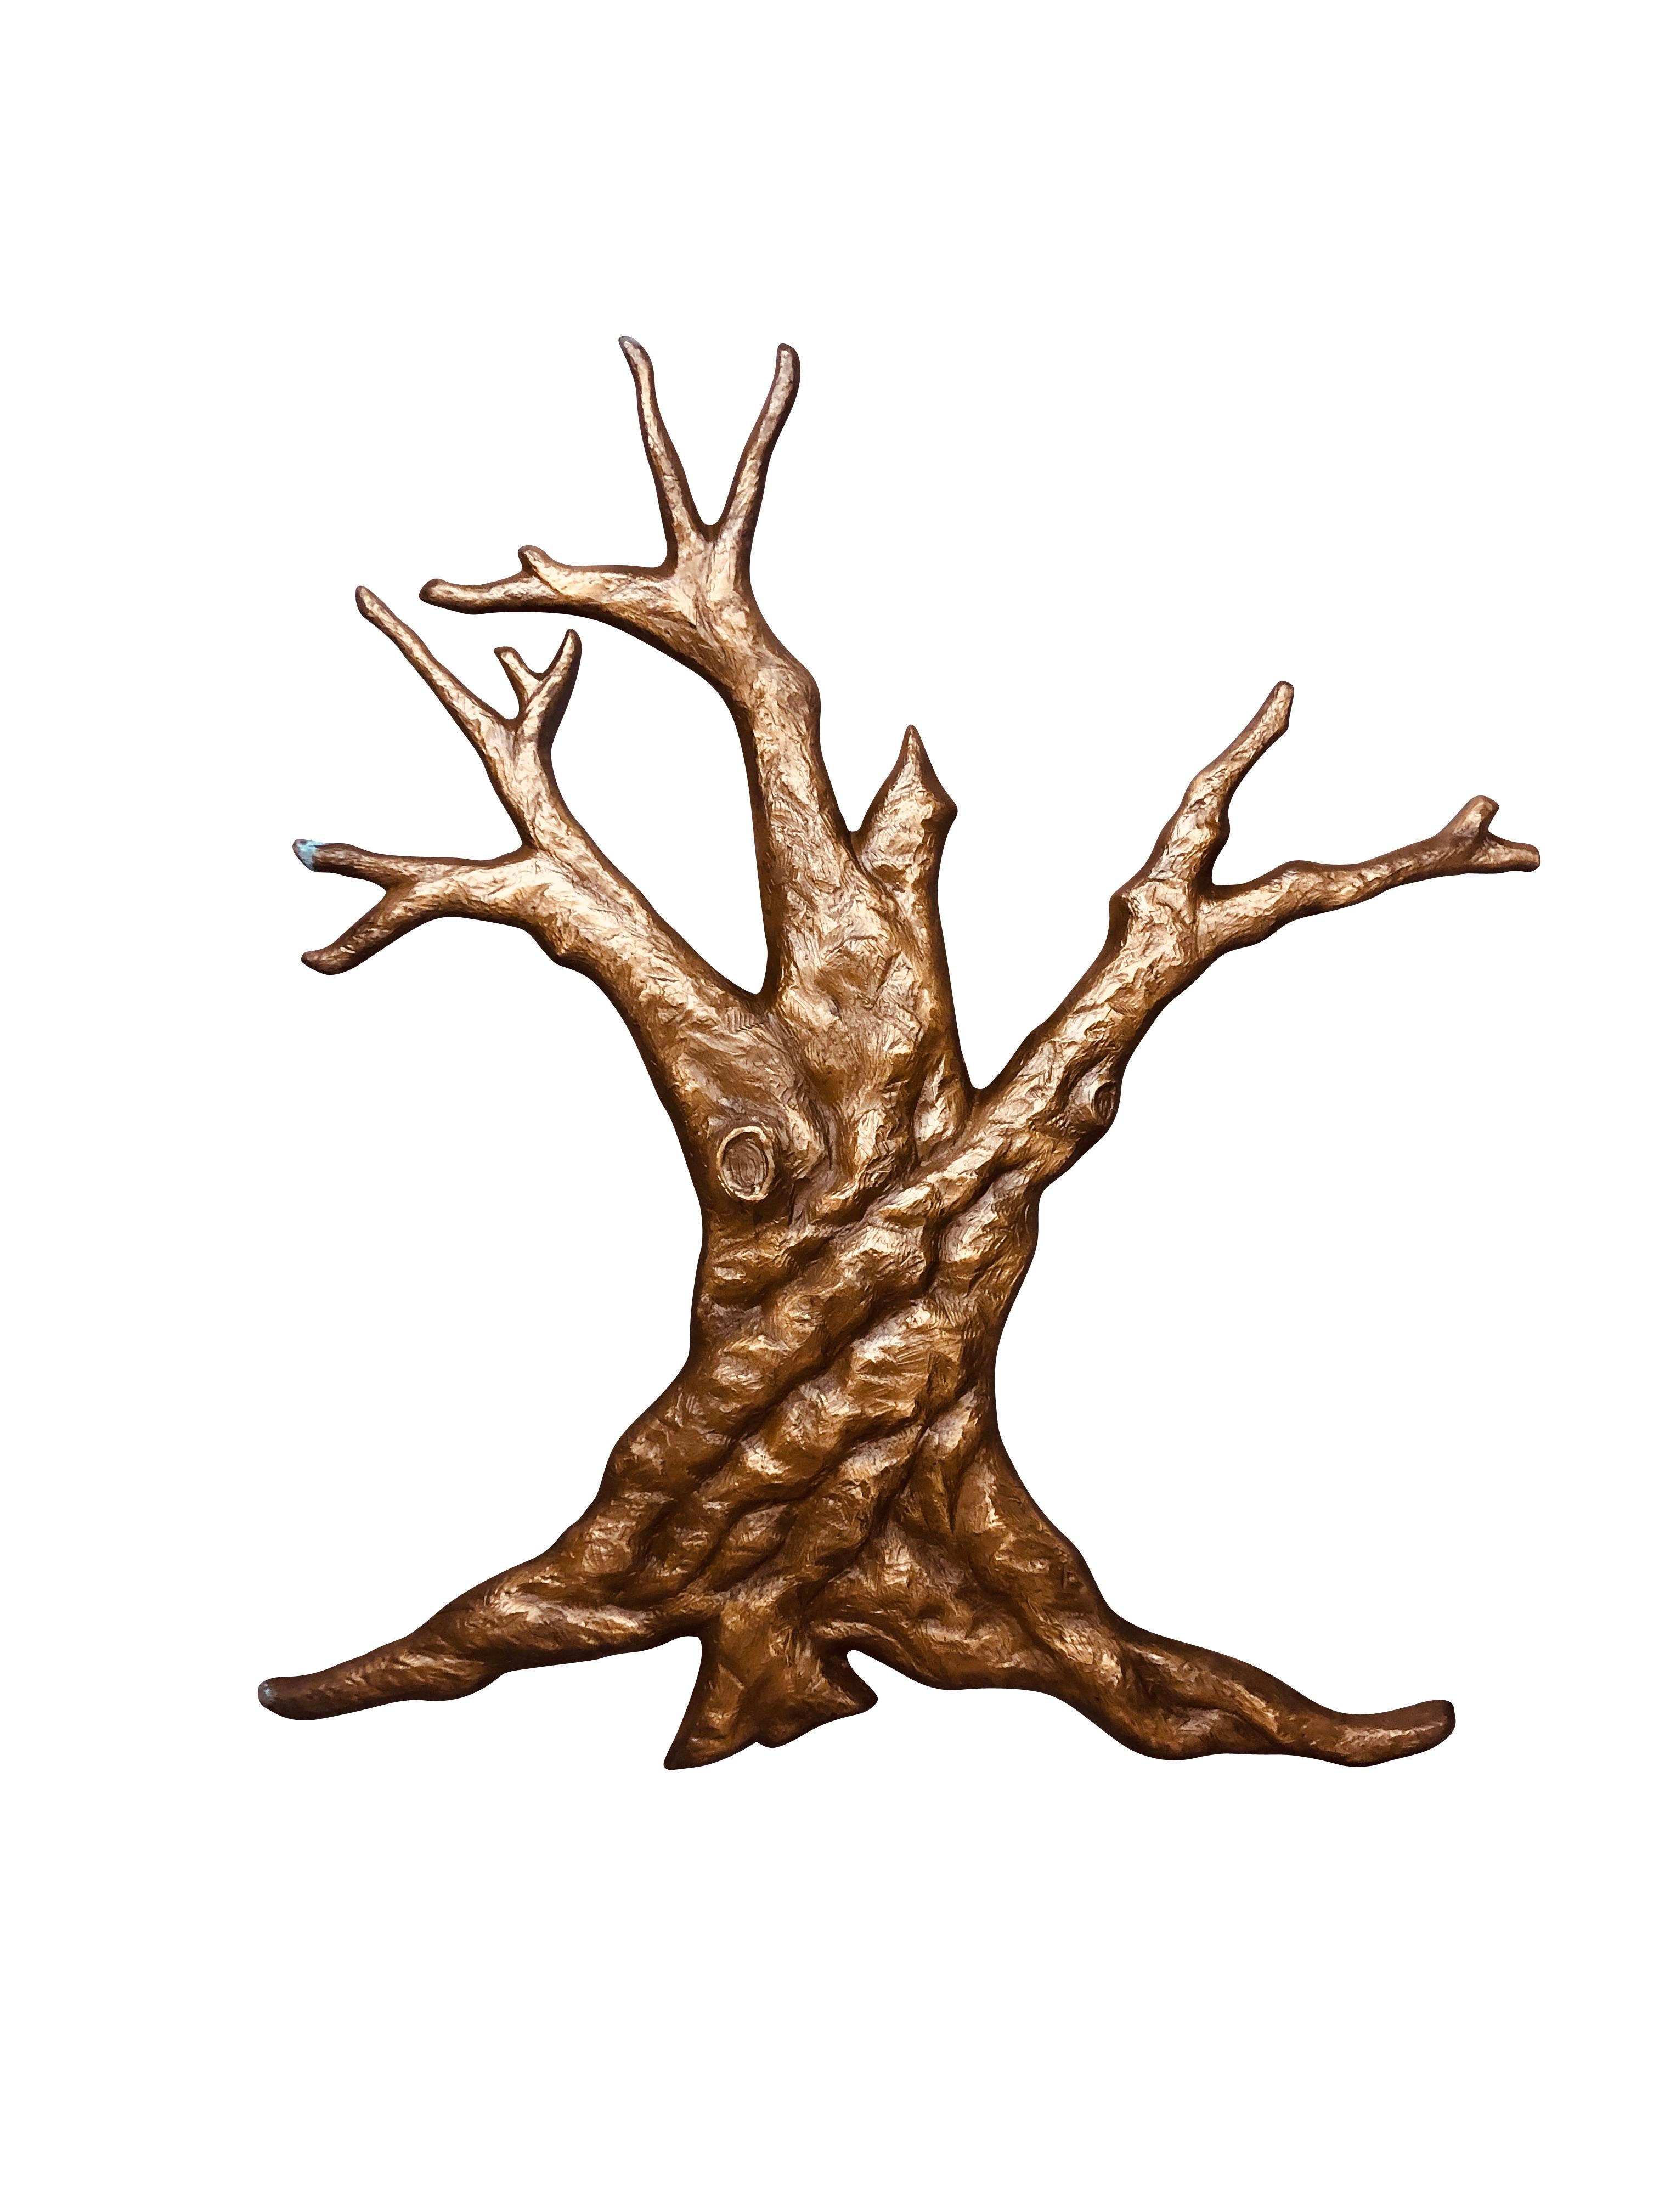 Brutalist natural bronze tree midcentury 1950s wall sculpture measuring 48 inches high by 39 inches wide by 1.25 inches in depth. Lifelike tree form sculpture of tree root and trunk with finely incised detail of tree bark. Fabulous natural wall